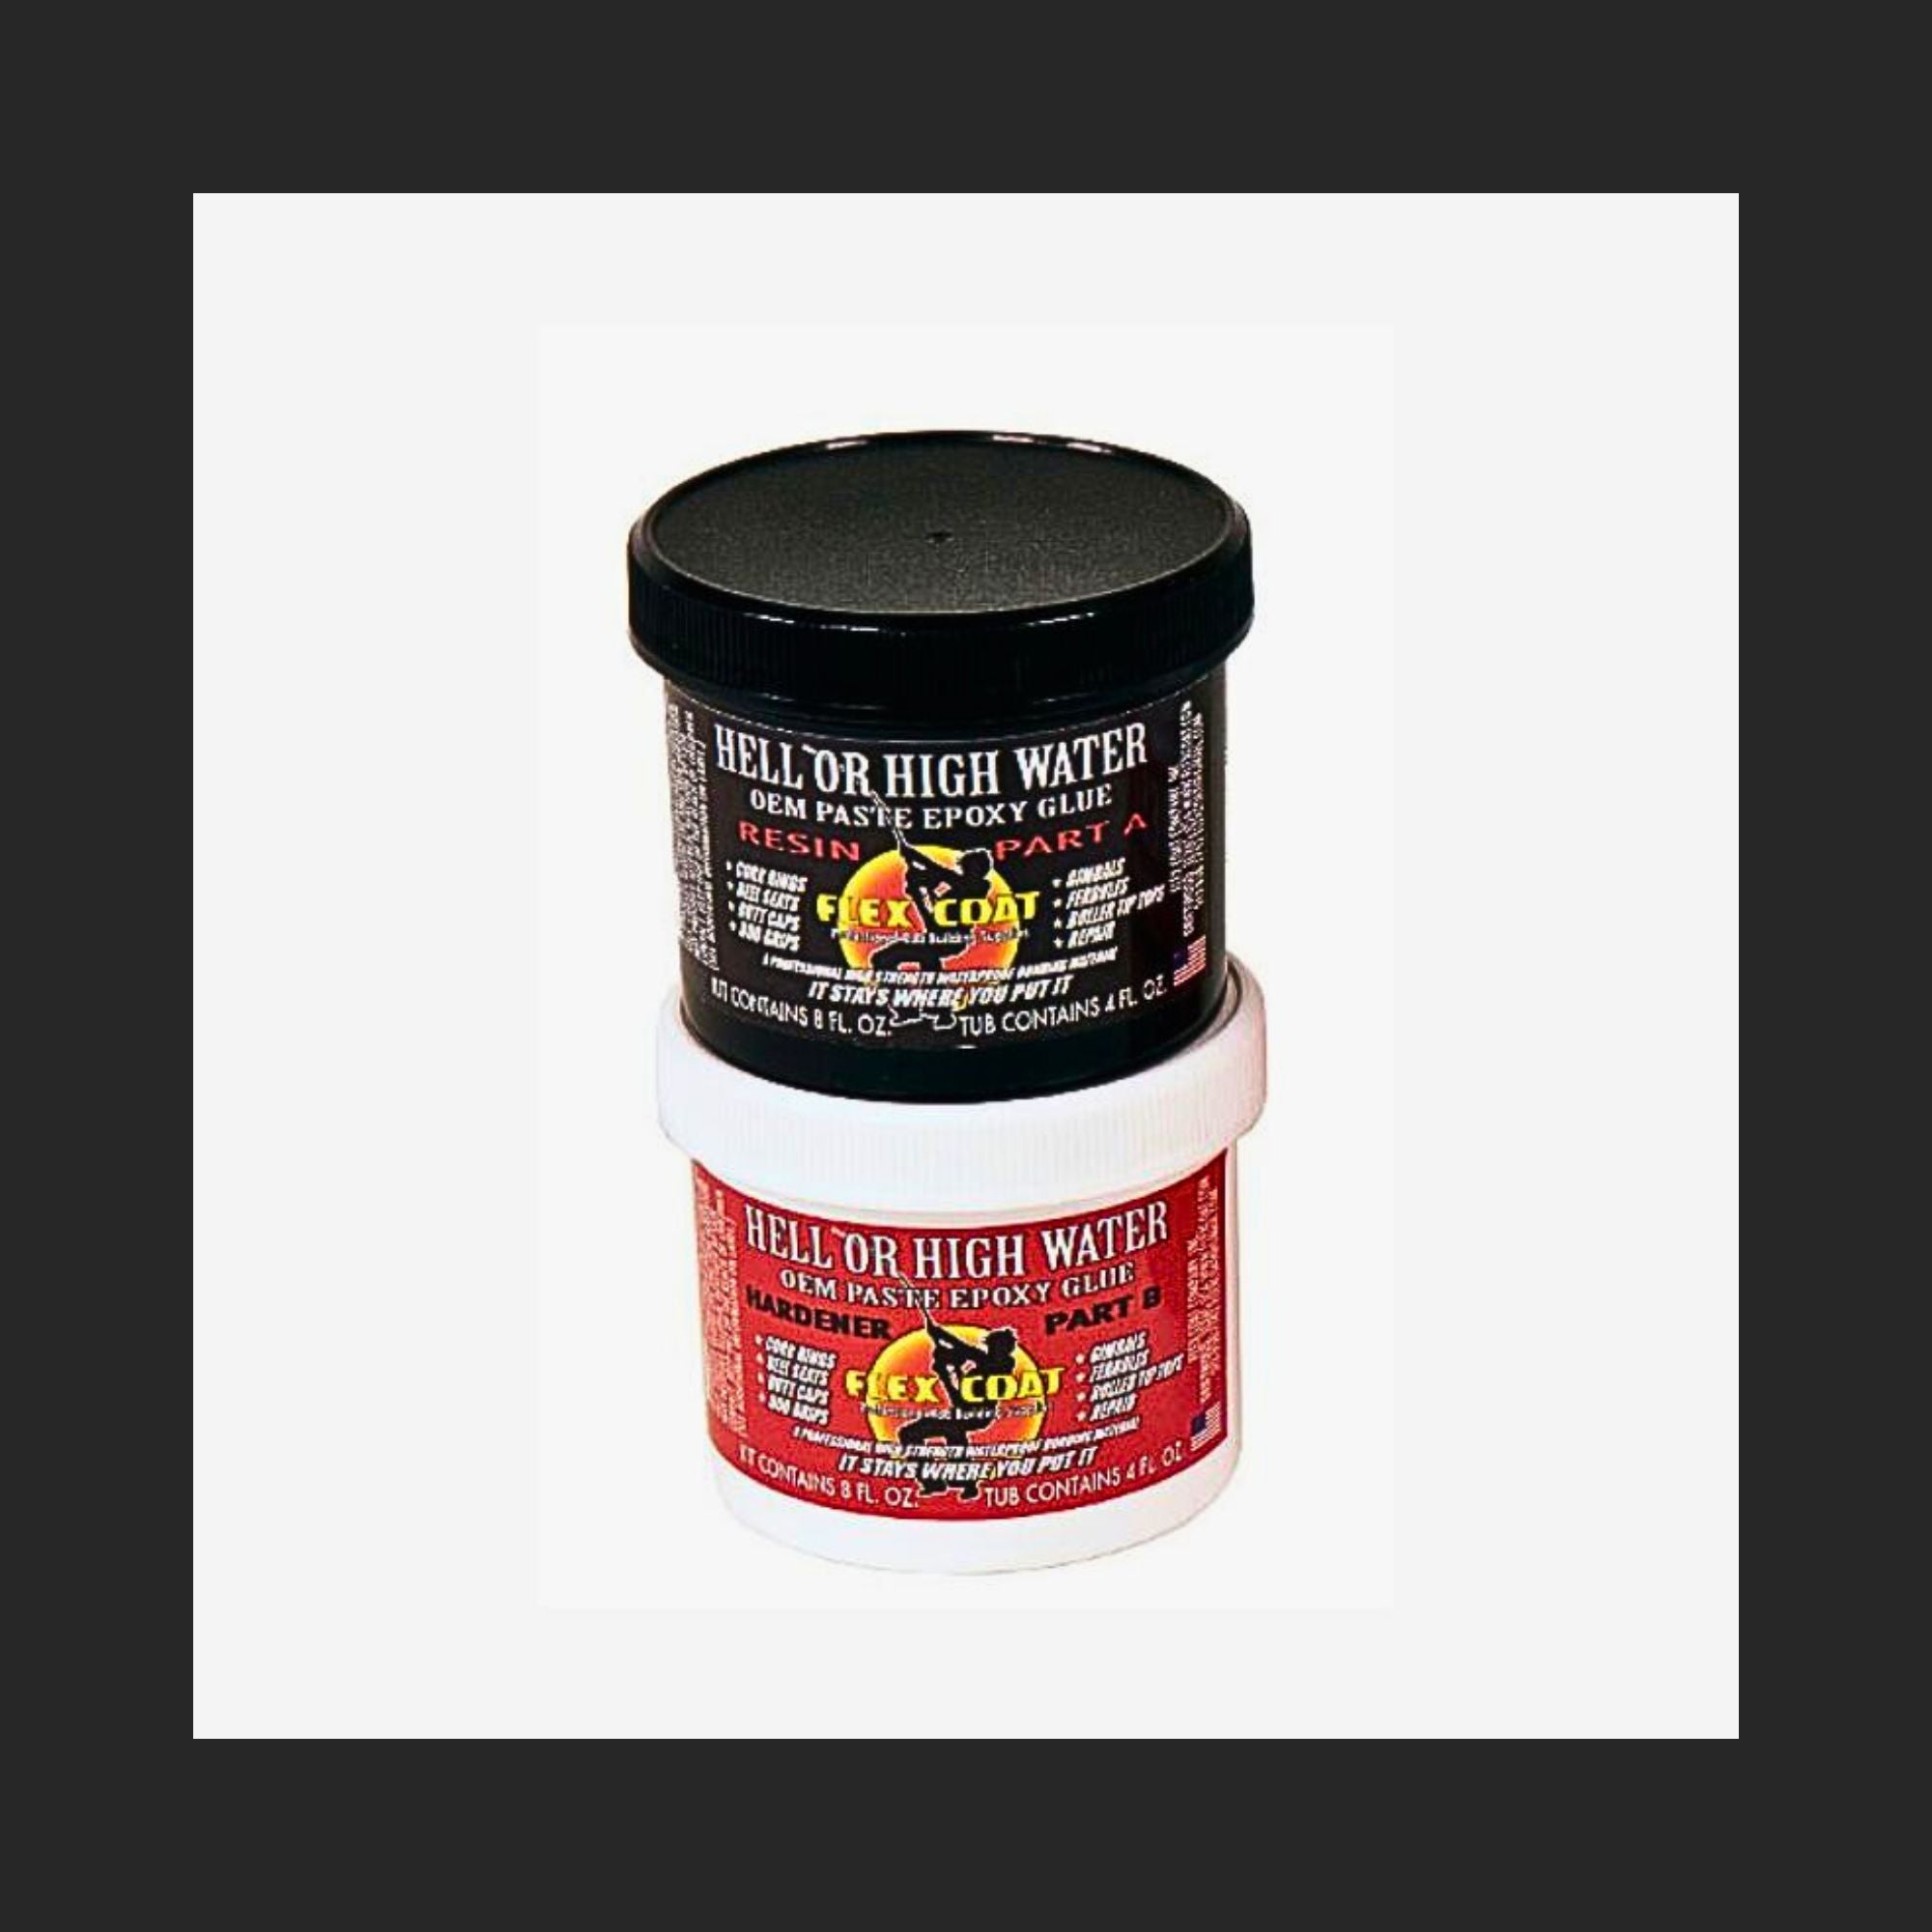 Hell or High Water Paste Epoxy Glue, Flex Coat, Rod Building